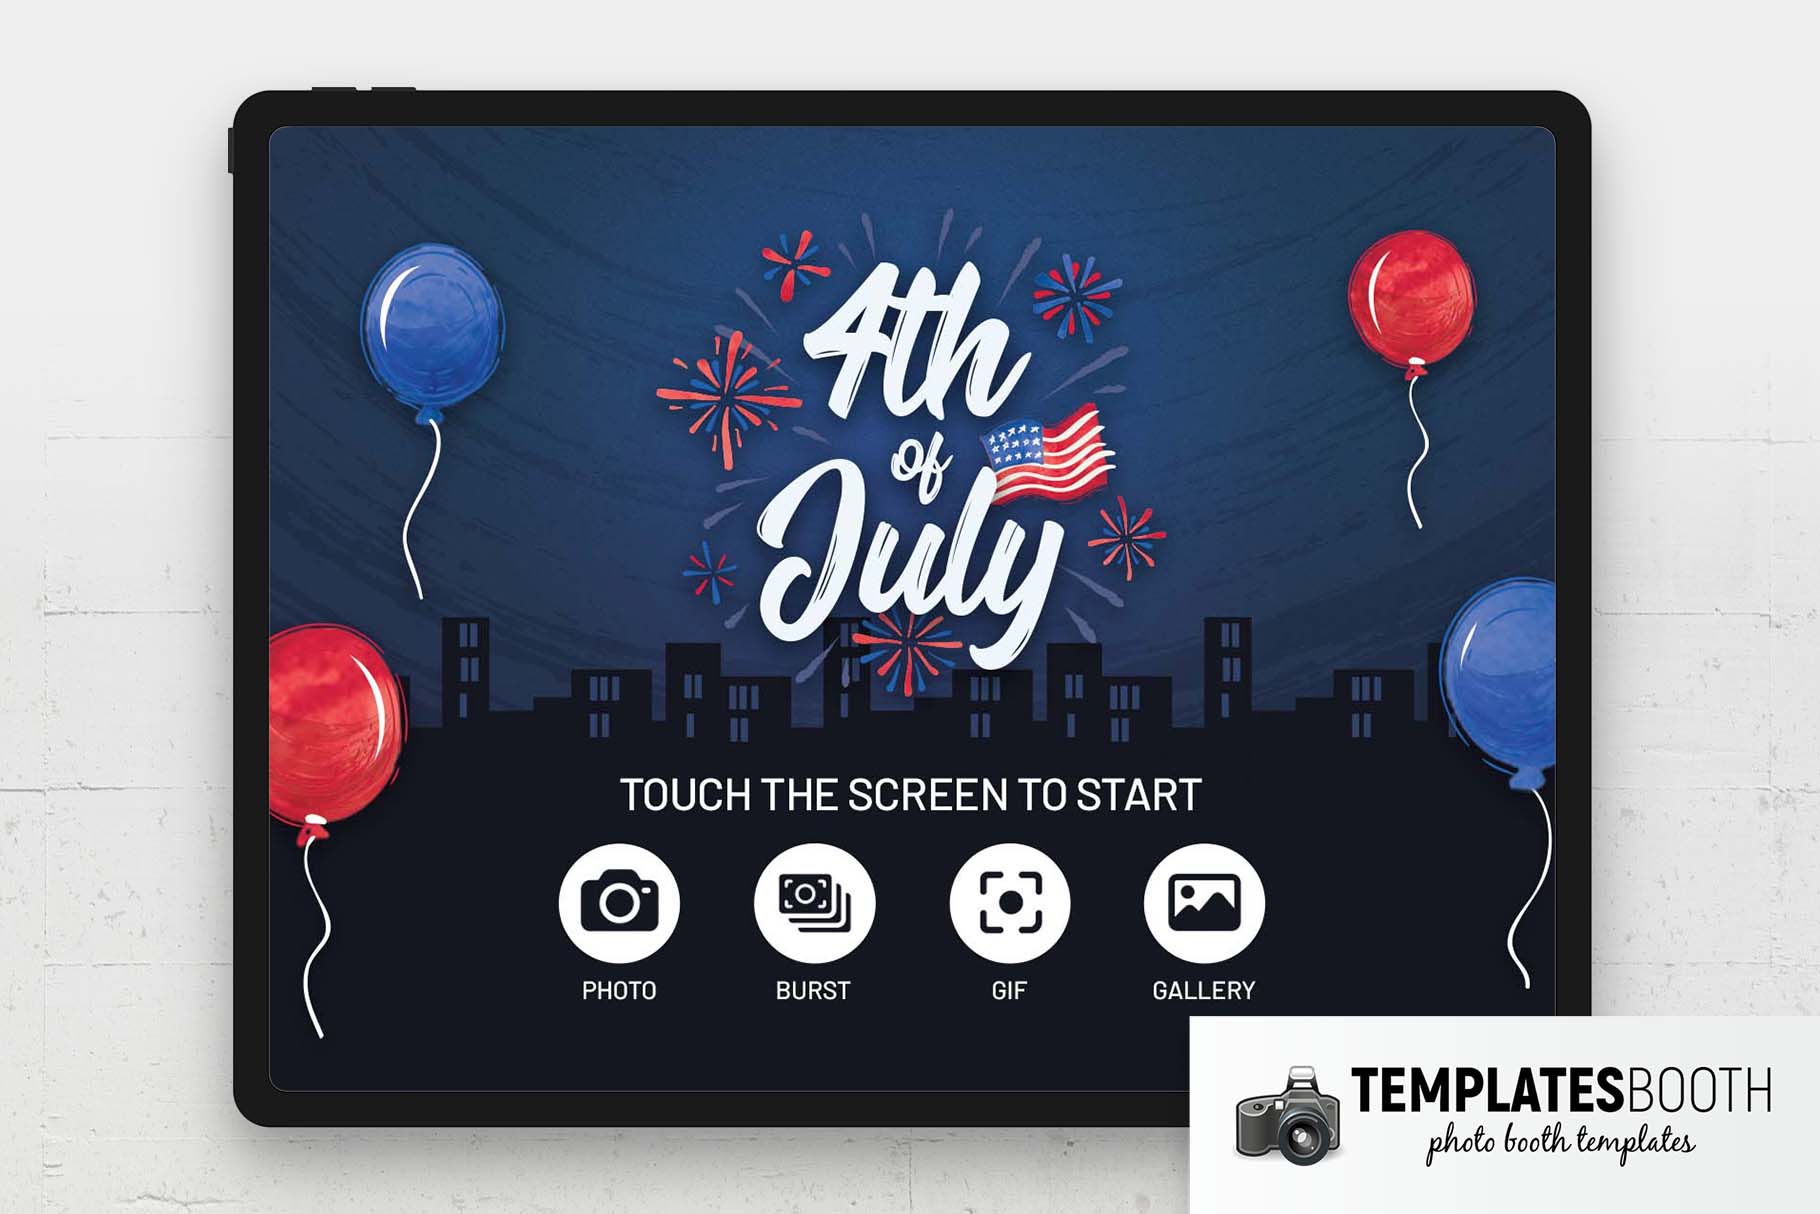 Fun 4th of July Photo Booth Welcome Screen